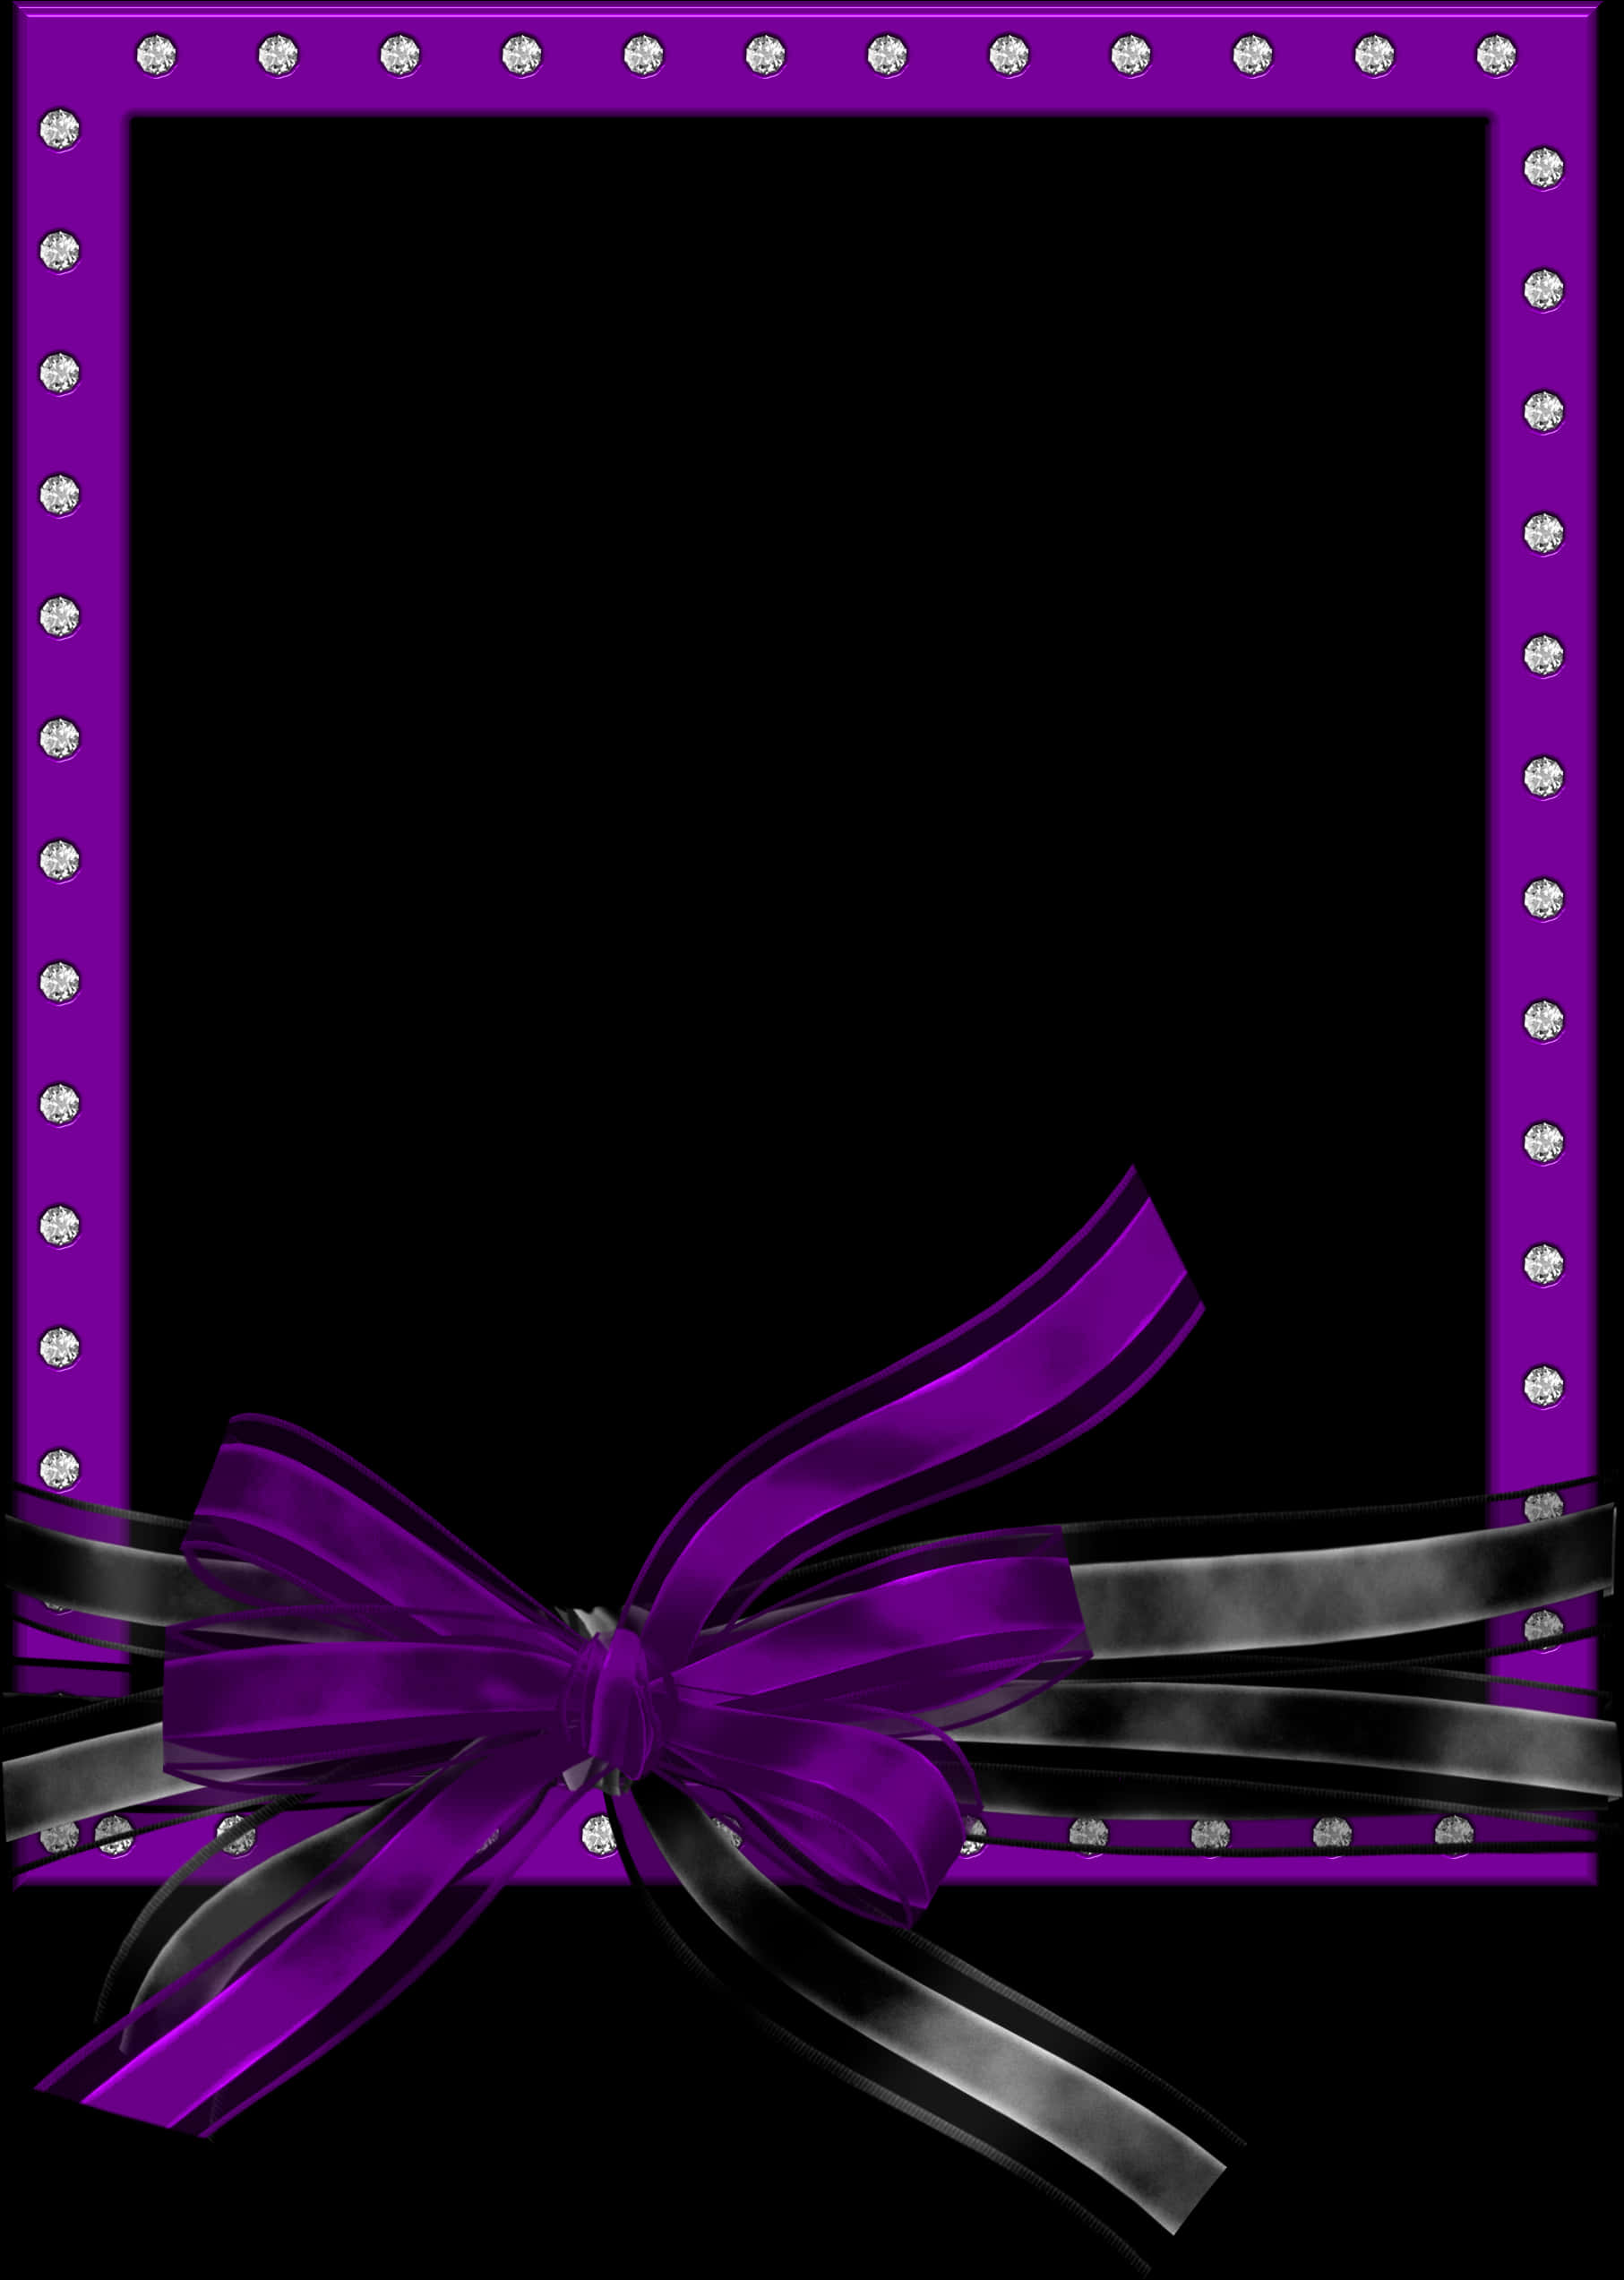 A Purple And Black Bow On A Black Background